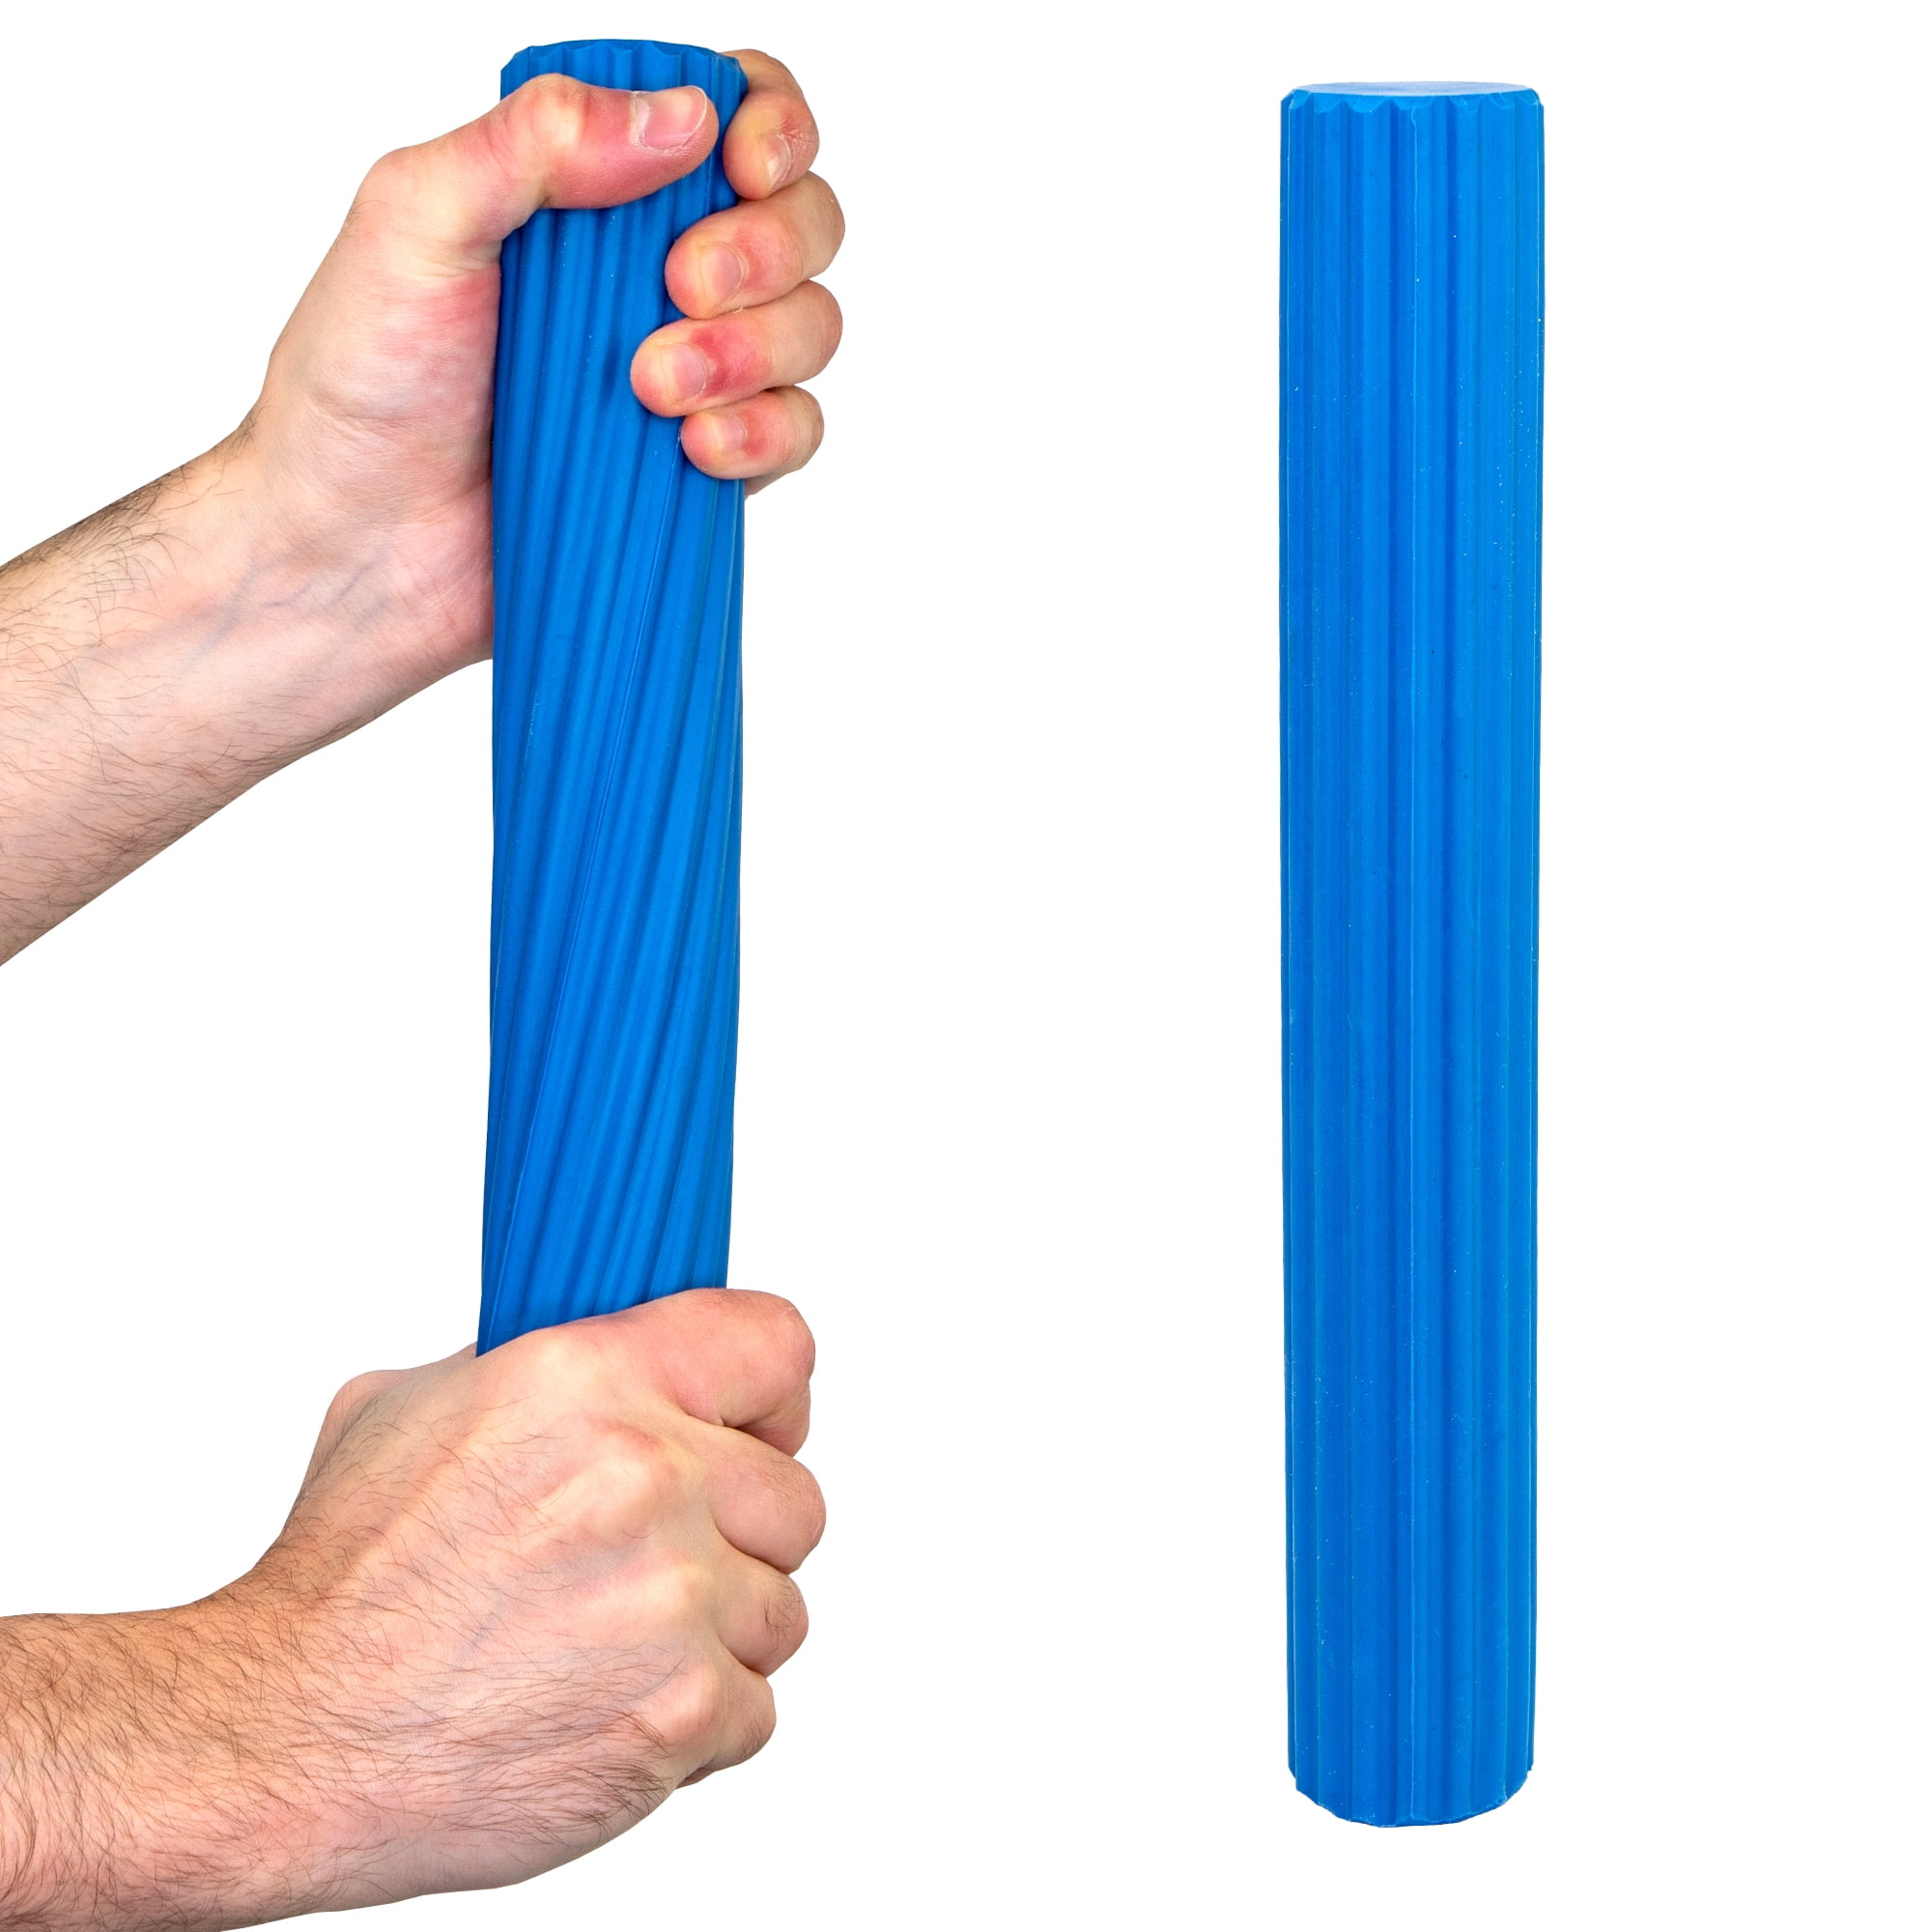 HAND GRIPS 2 PCS SET STRENGTHENS HANDS WRISTS & FOREARMS PERFECT HAND TRAINER 